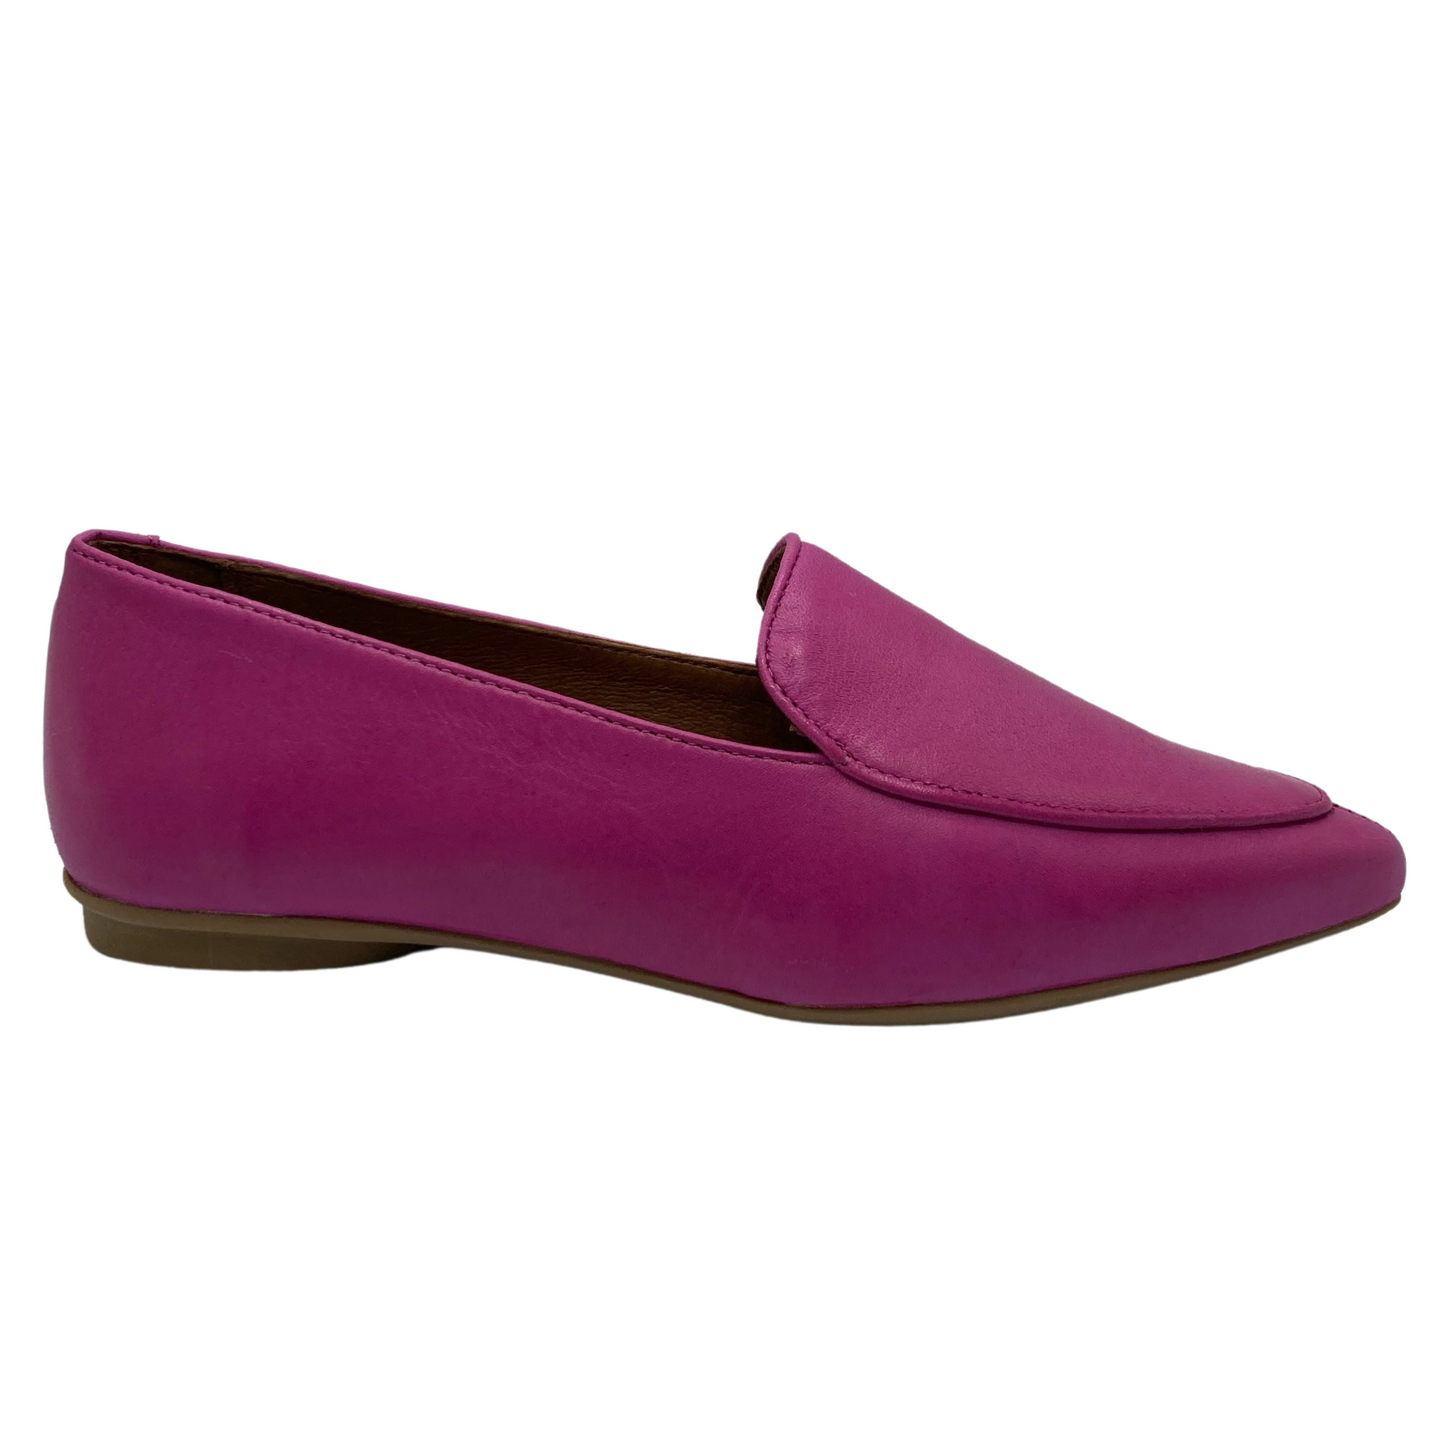 Right facing view of pink leather pointed toe flat with 1/2 inch heel and leather lining